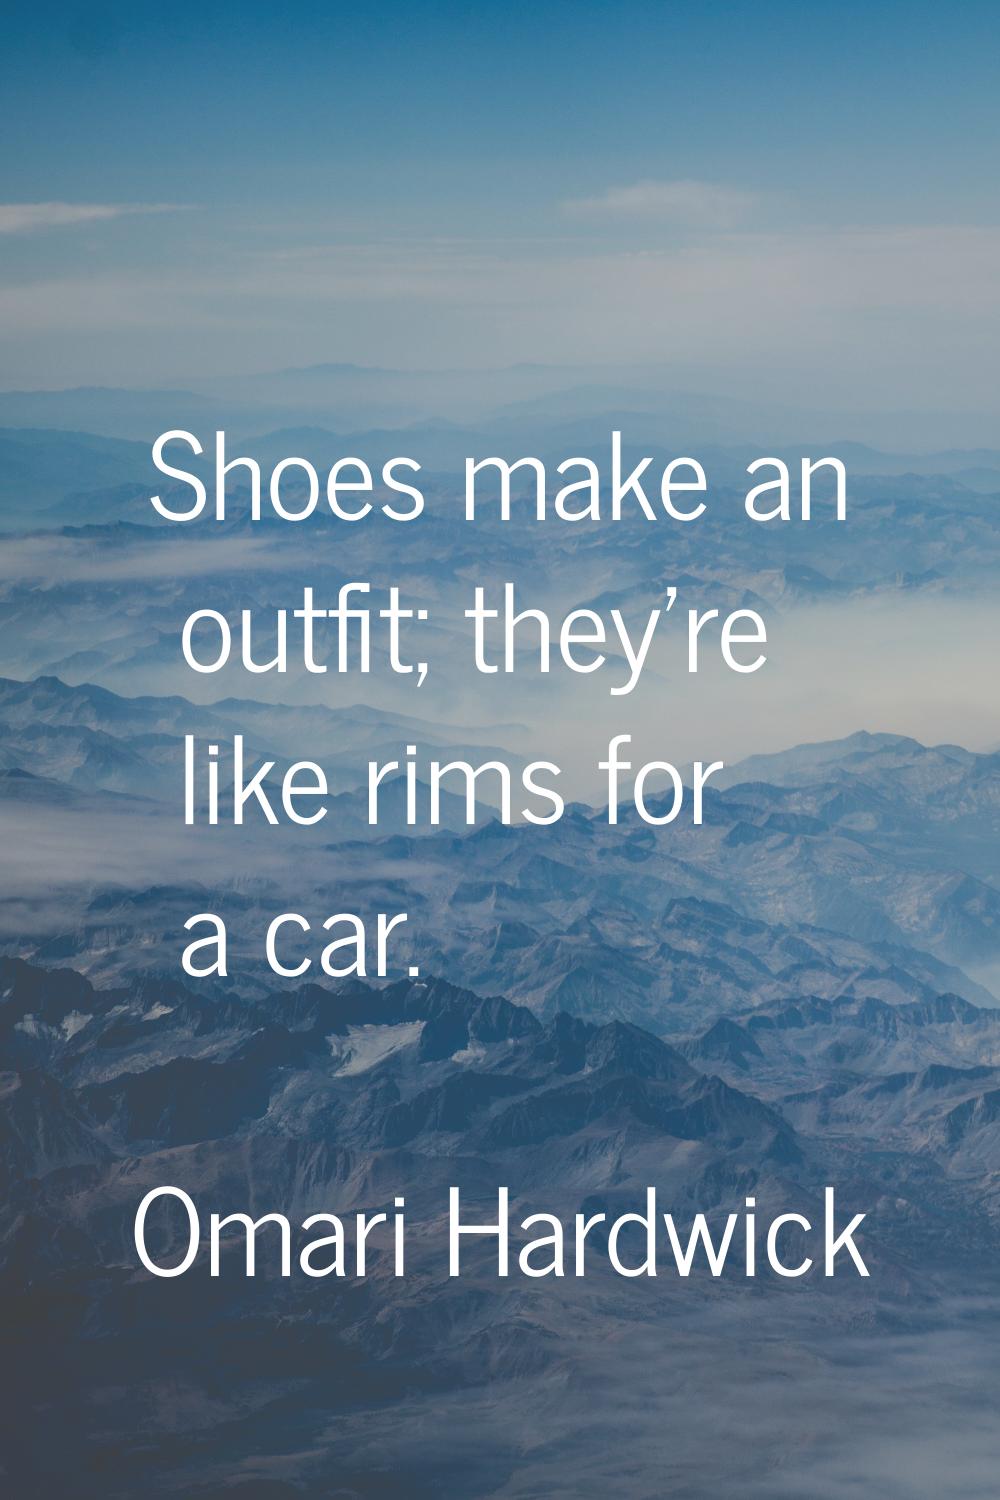 Shoes make an outfit; they're like rims for a car.